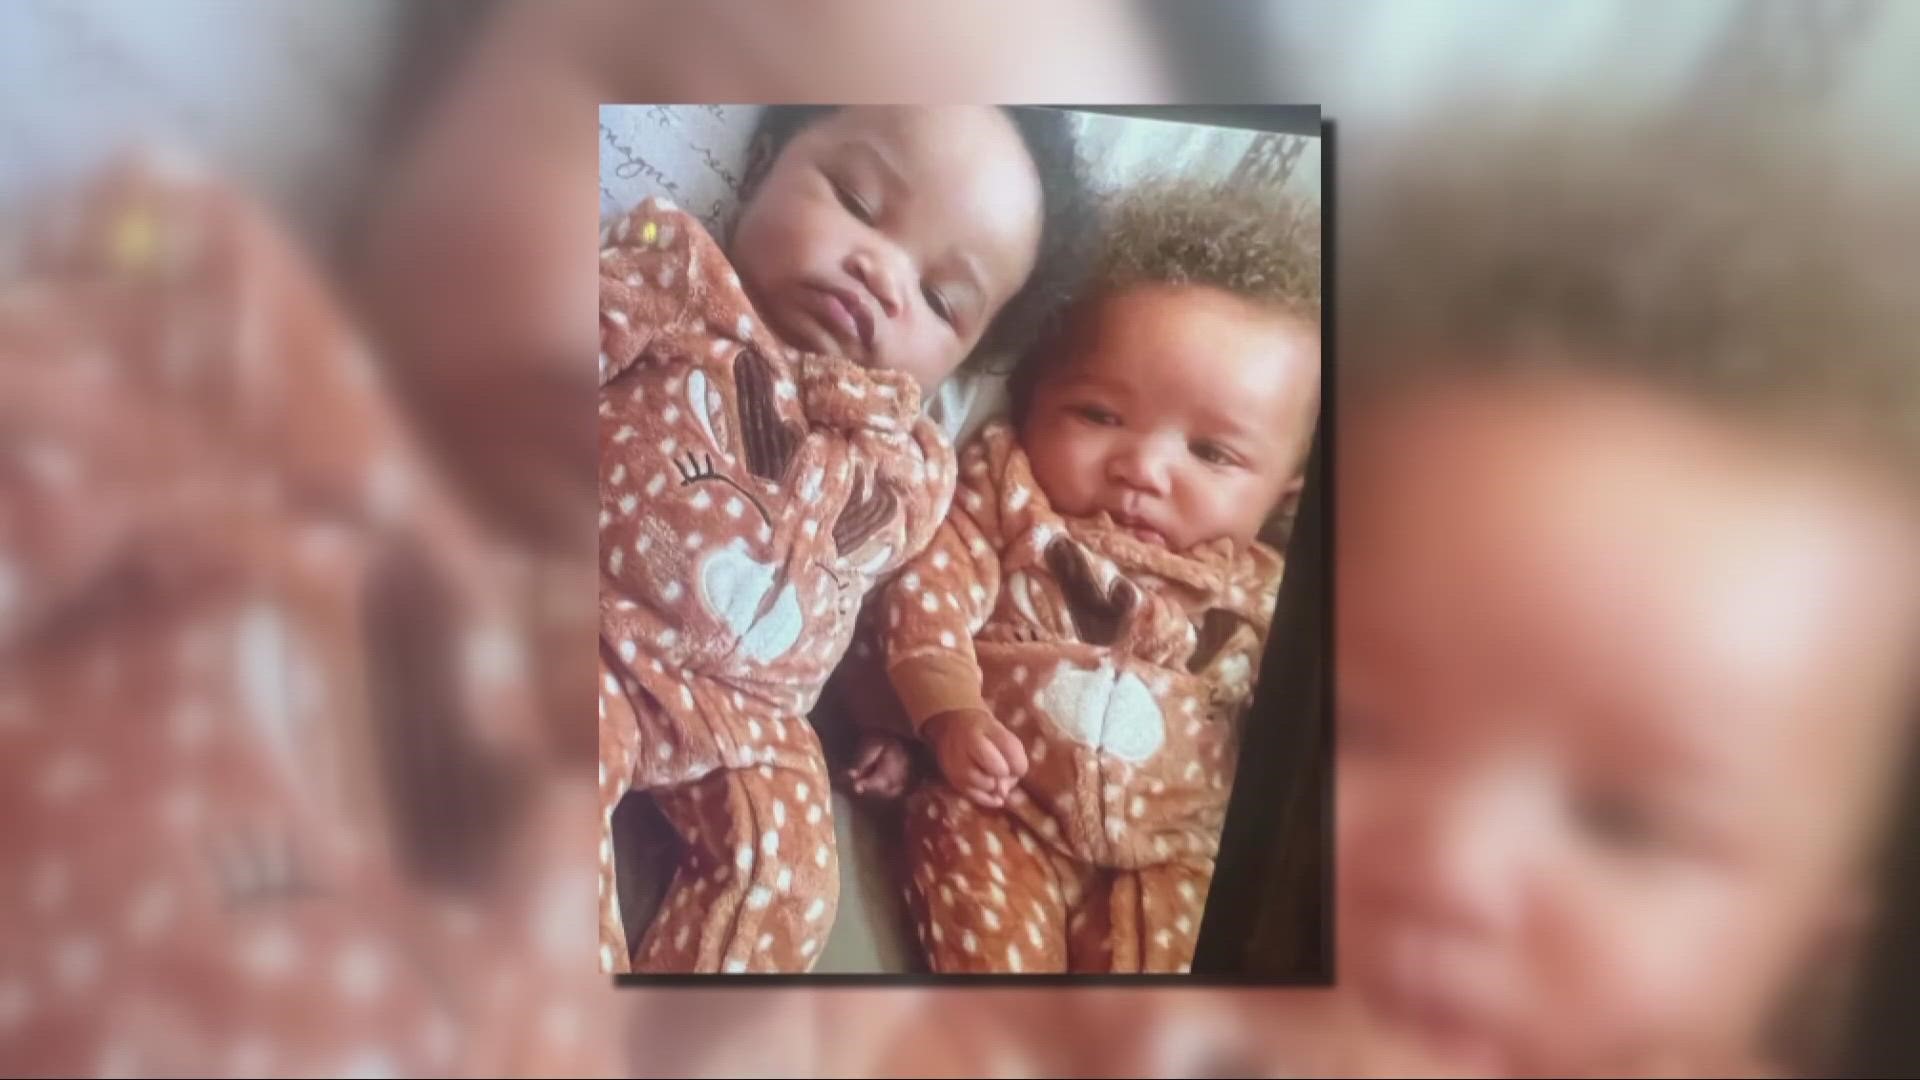 Police confirmed that 6-month-old Ky'air Thomas was pronounced dead just before midnight Saturday.